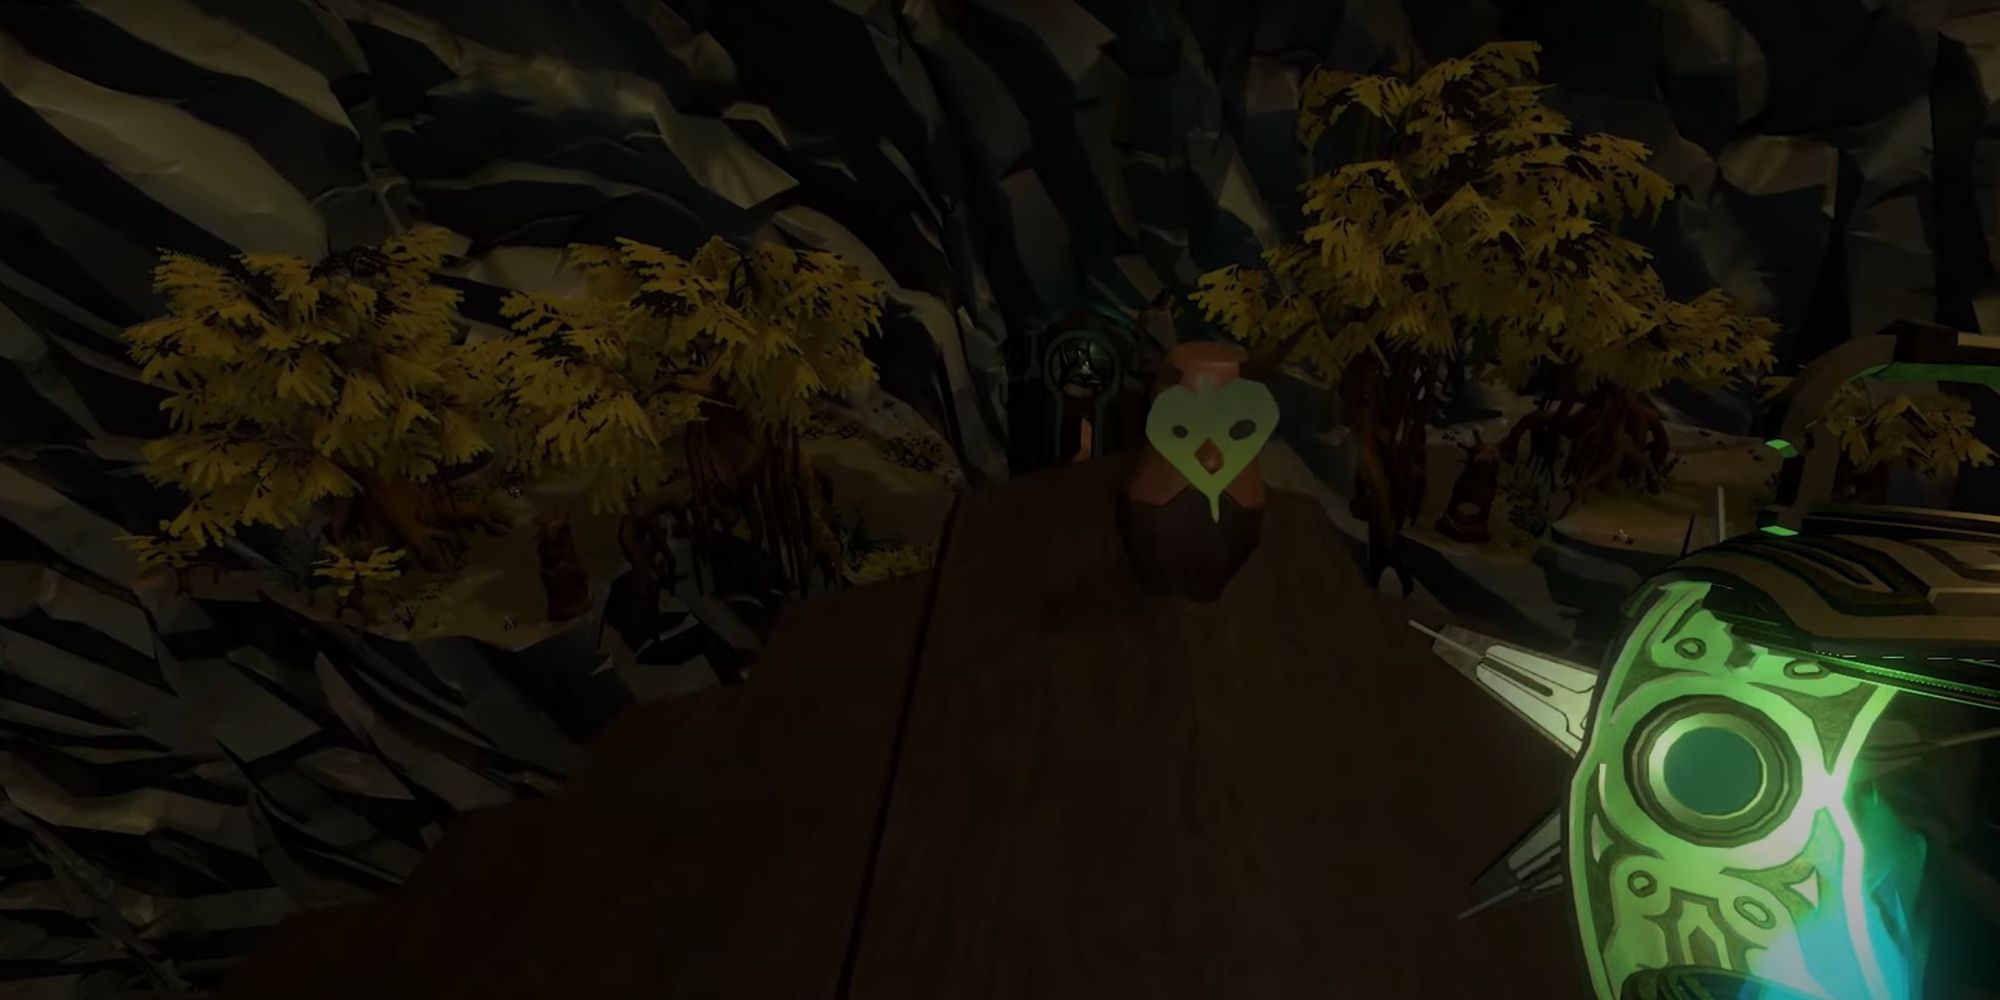 Outer Wilds Korok Seed doesn't upgrade the player's inventory, unfortunately